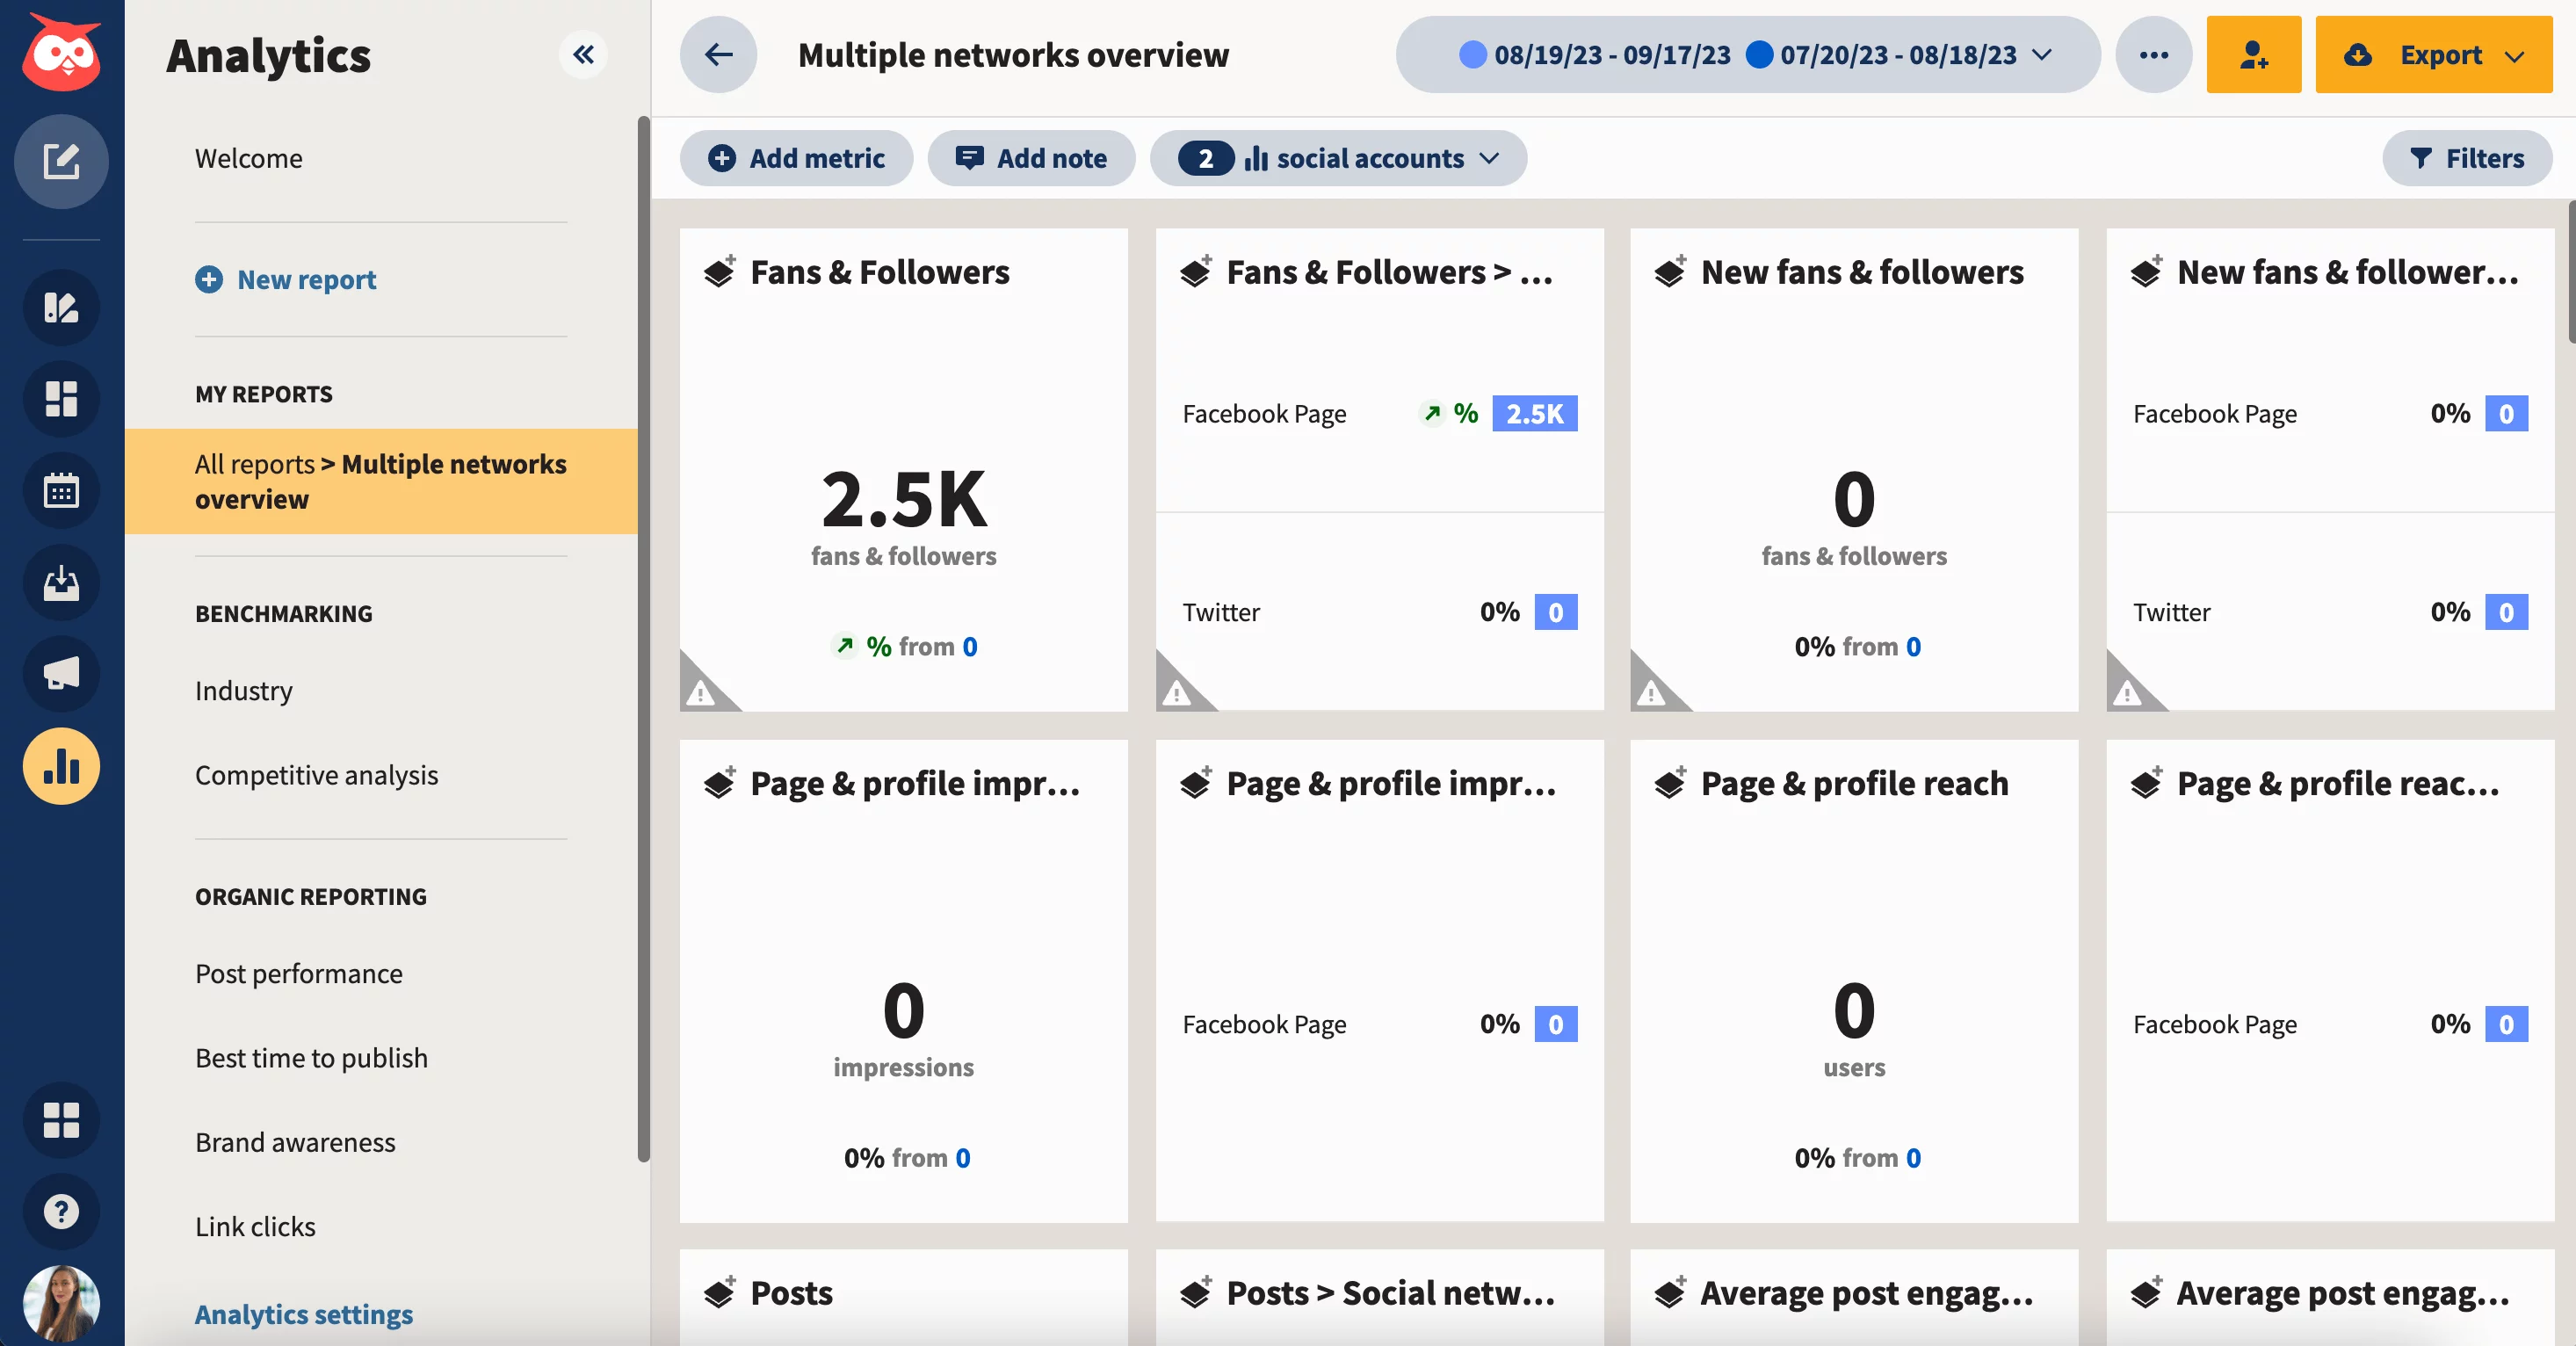 Hootsuite analytics page for Multiple networks overview, showing various reports such as Fans & followers count, Page & profile impressions, or Posts engagement.